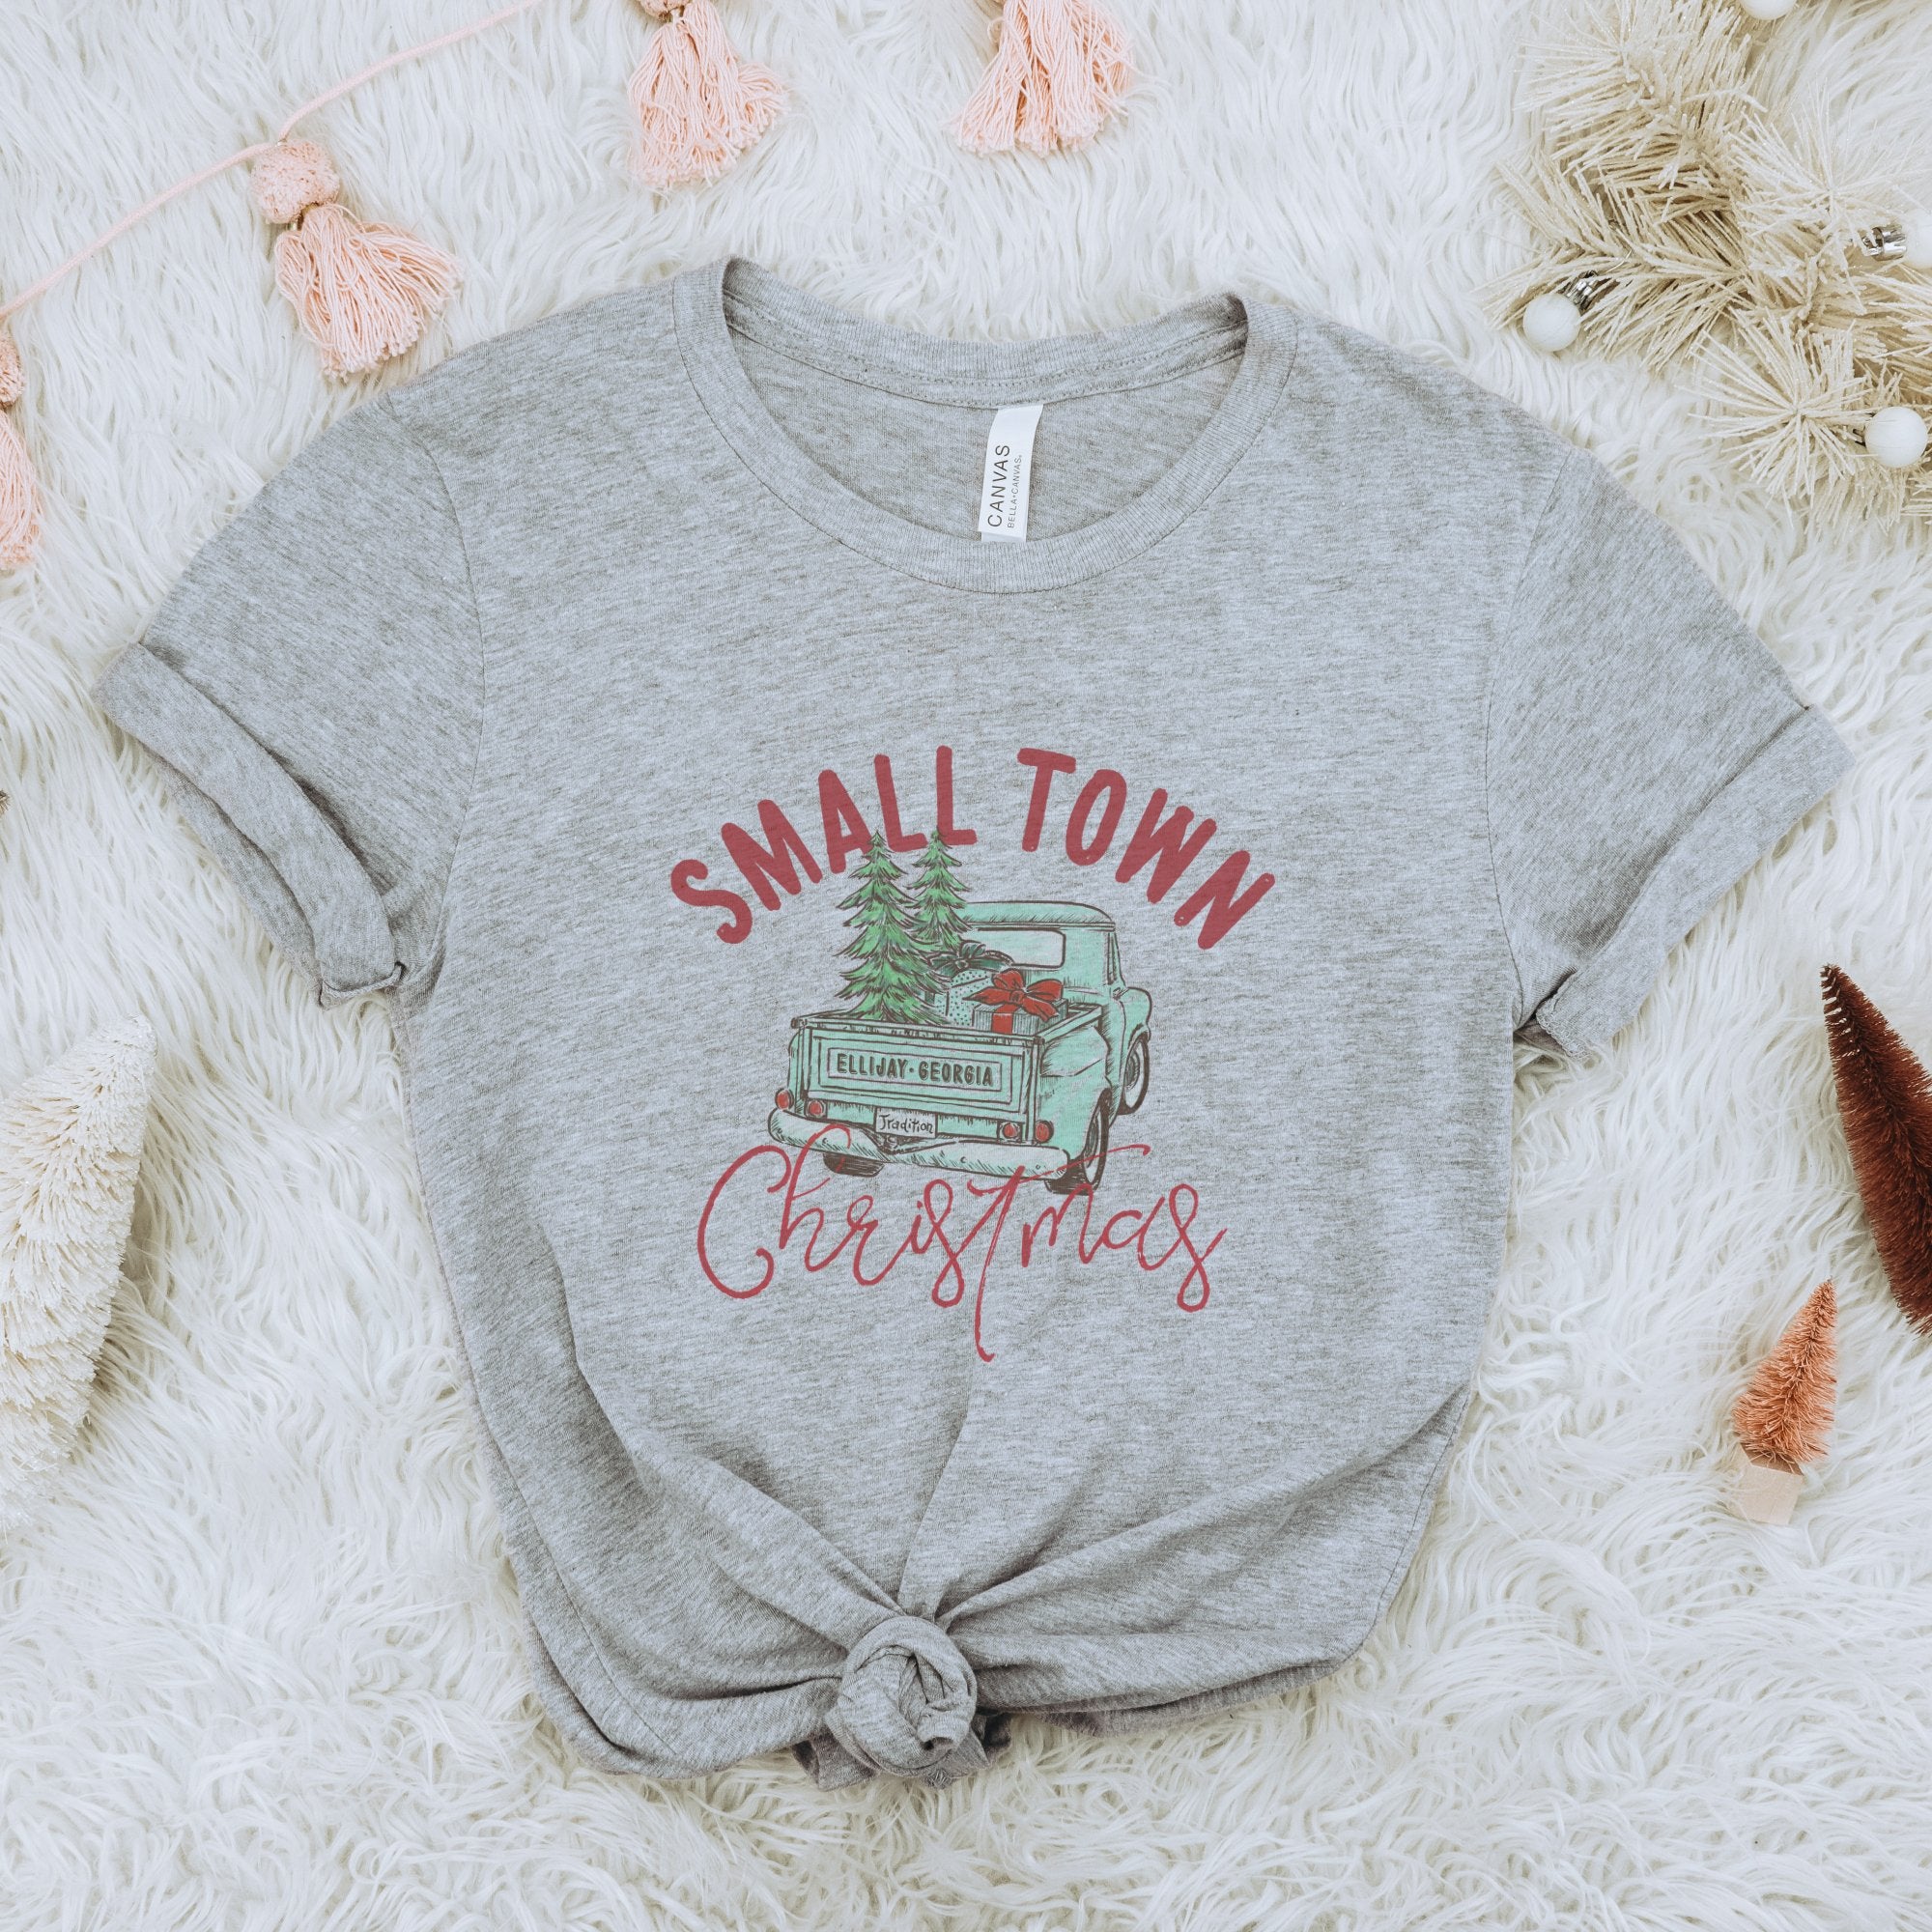 Small Town Christmas T-shirt - Trendznmore